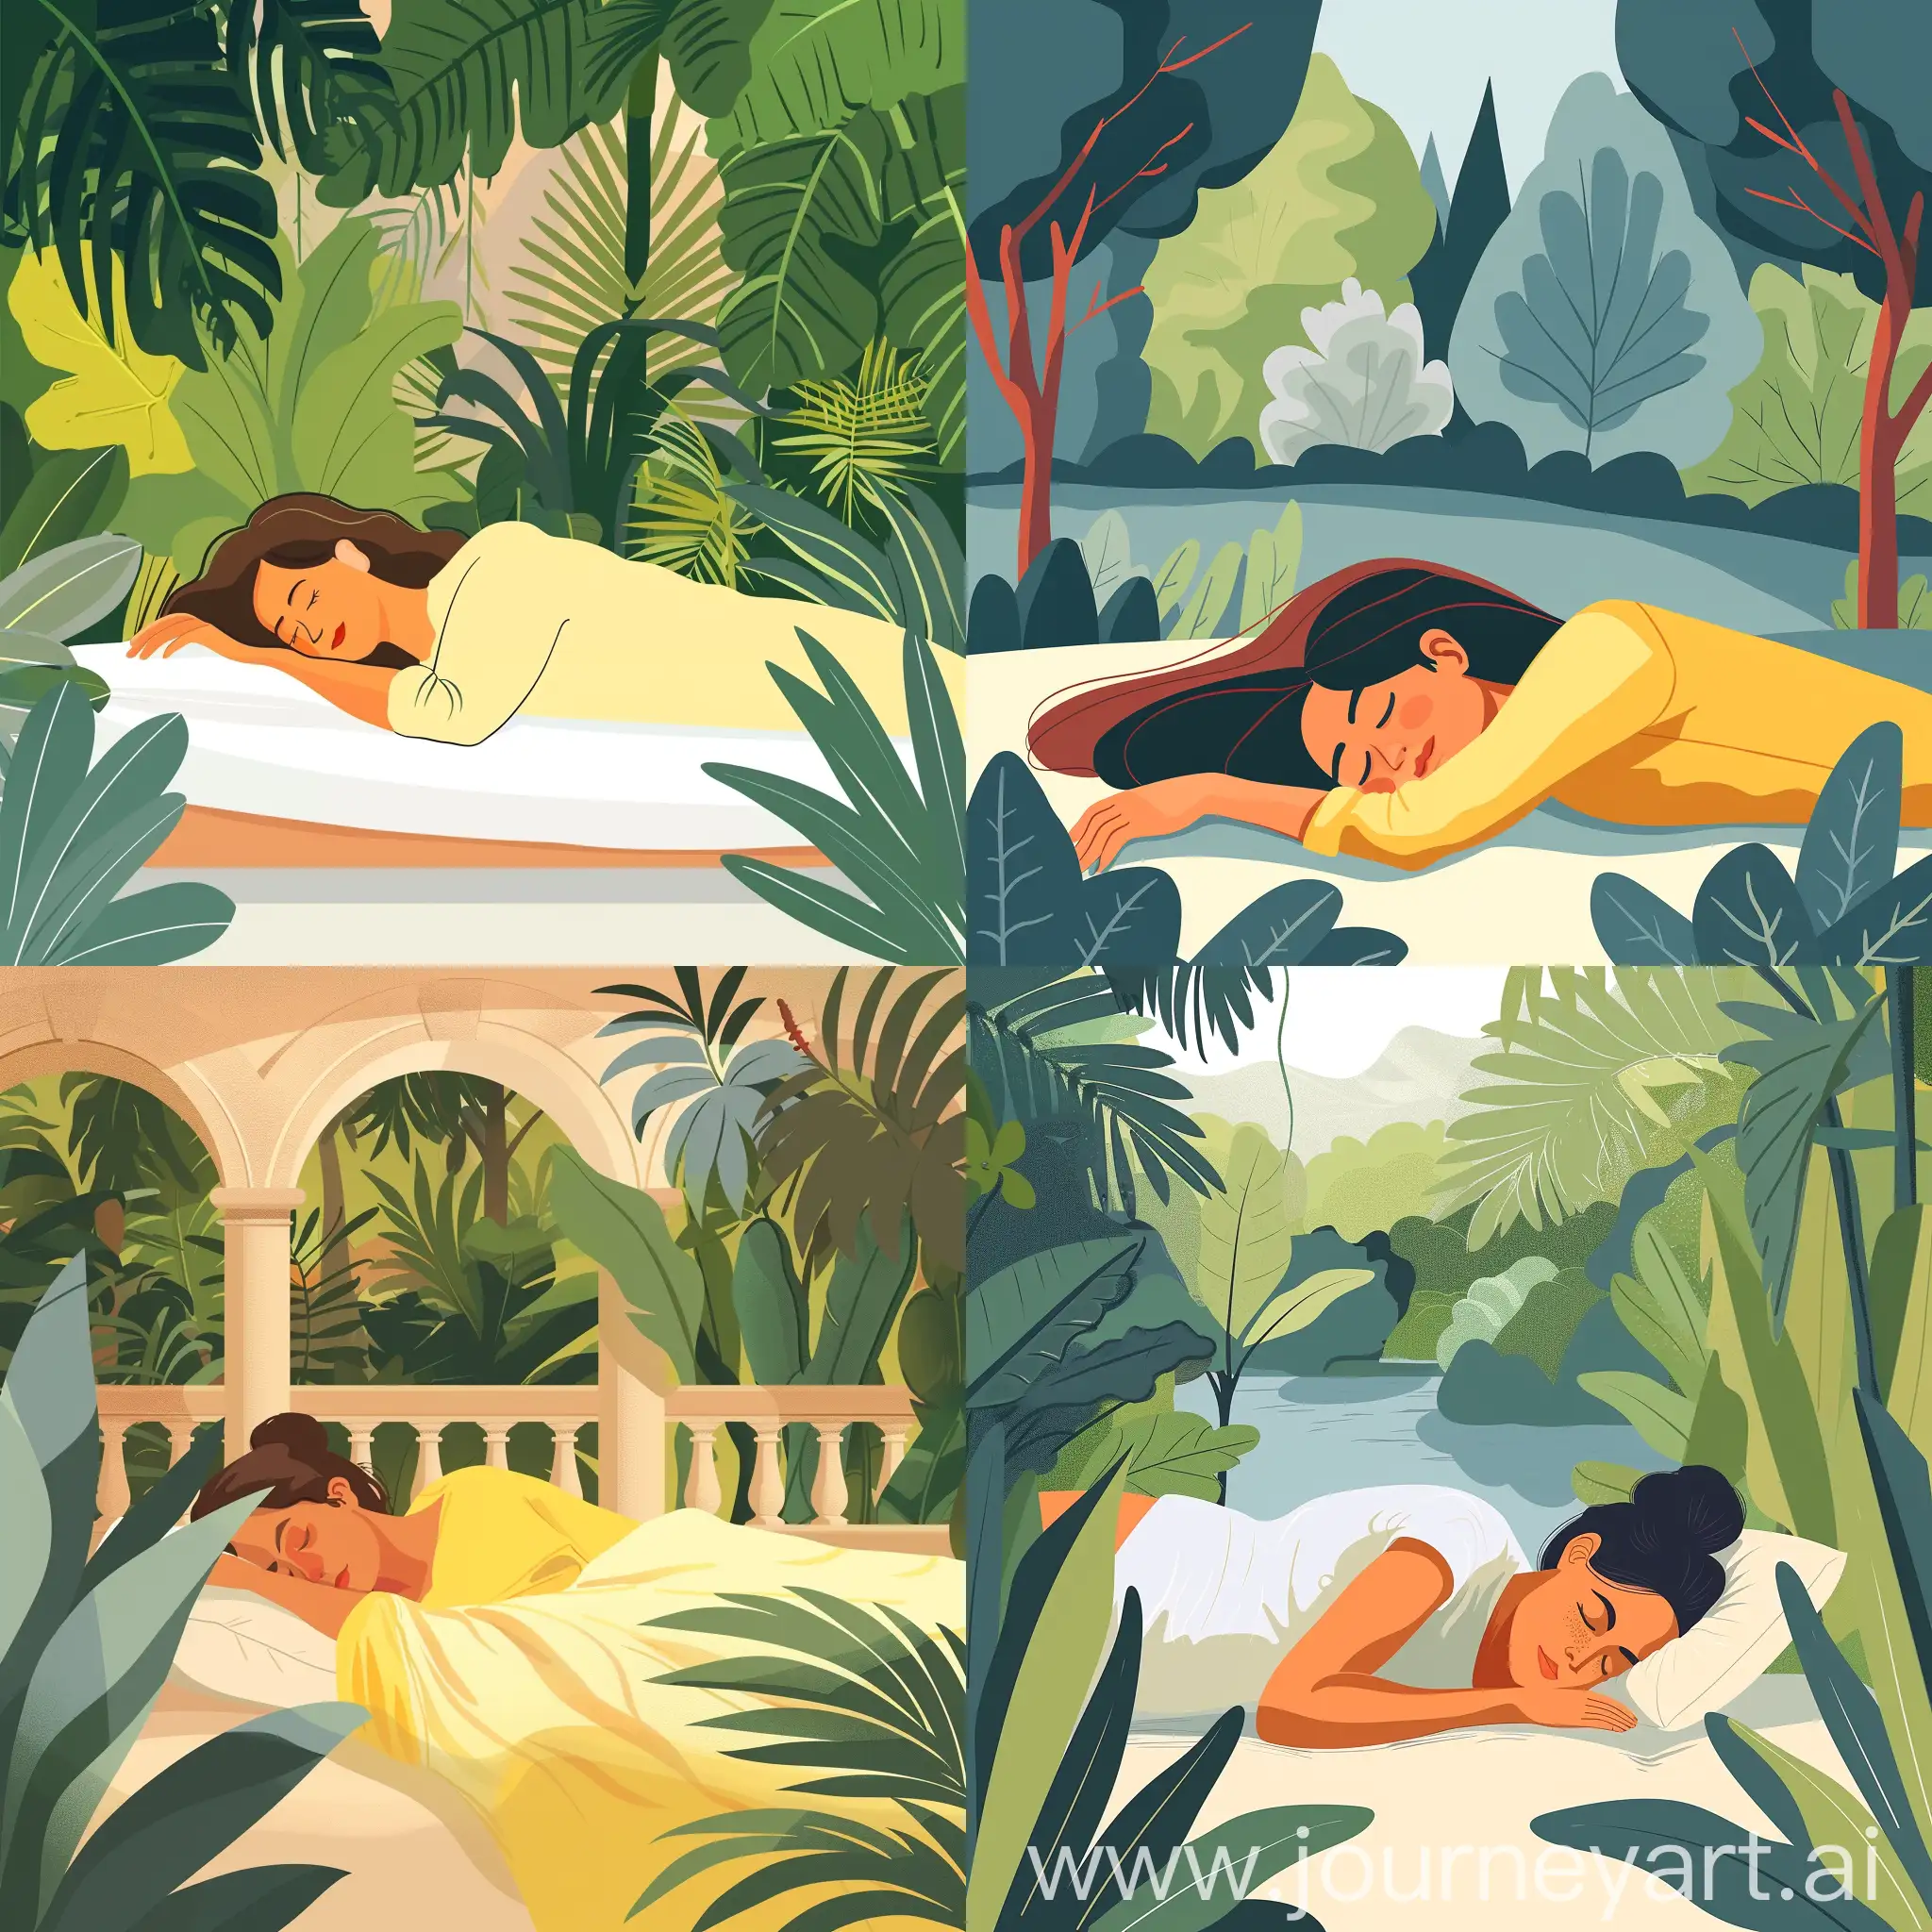 A women of age 40 sleep in cool place with surrounding beautiful park of animated